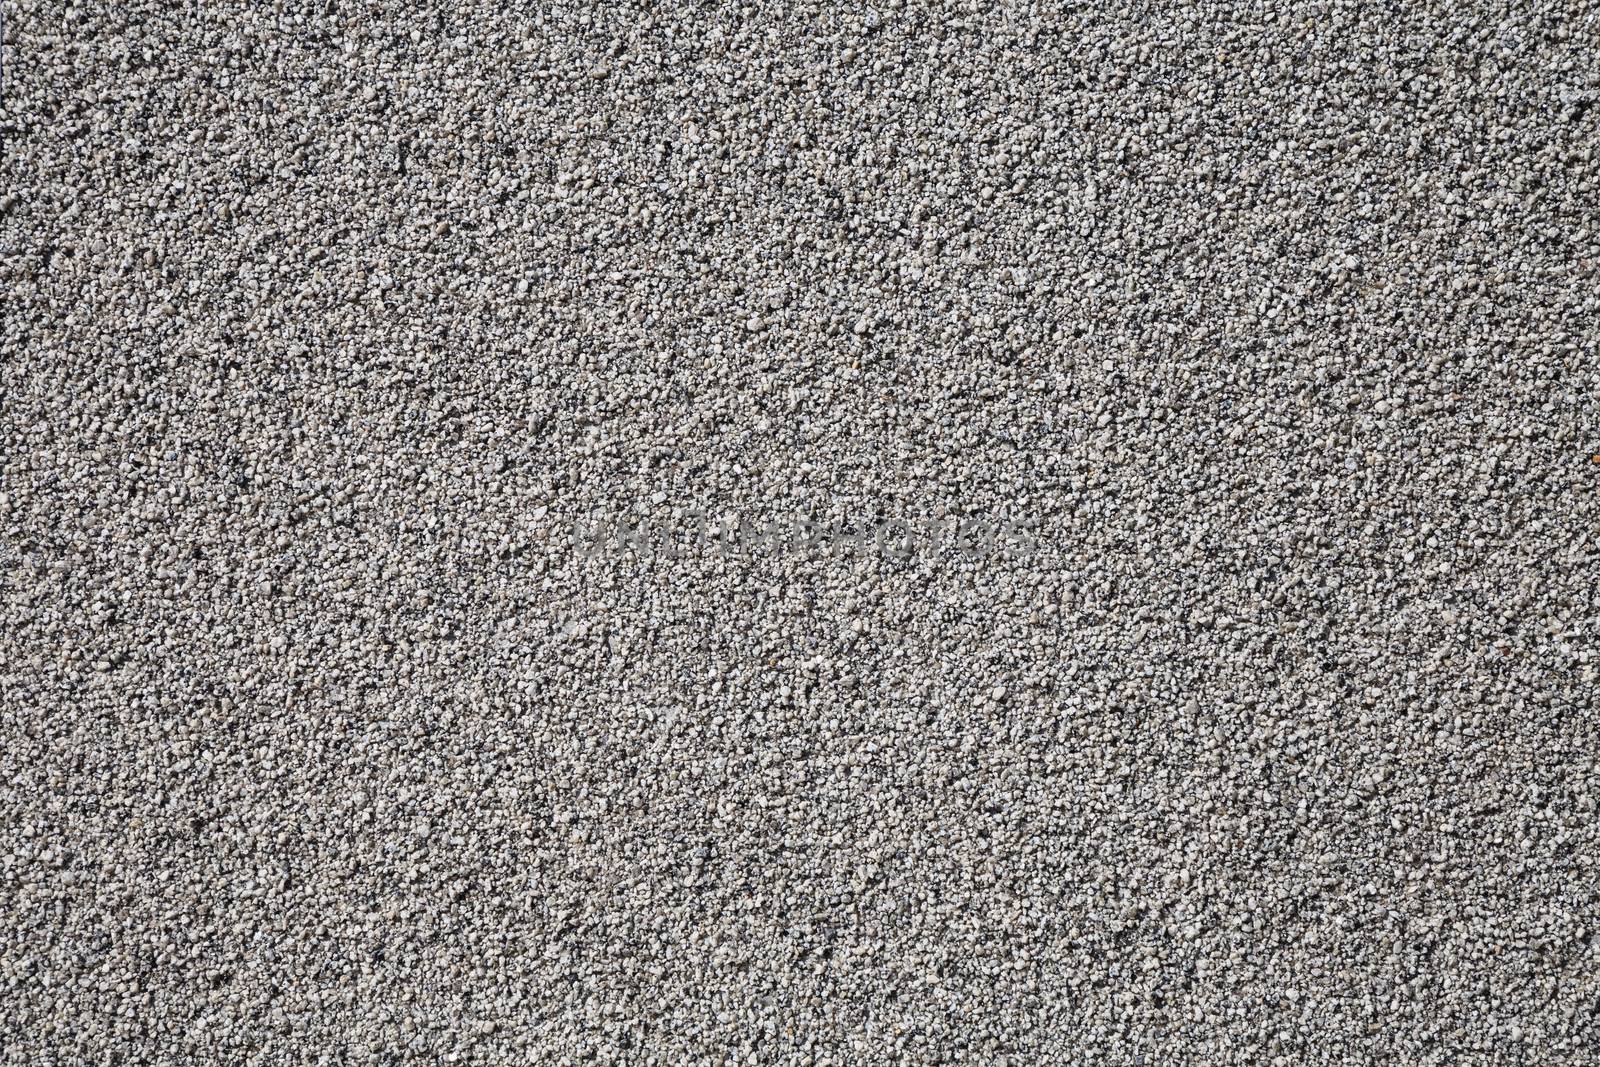 Grey wall made of very small pebble evenly spread by DamantisZ